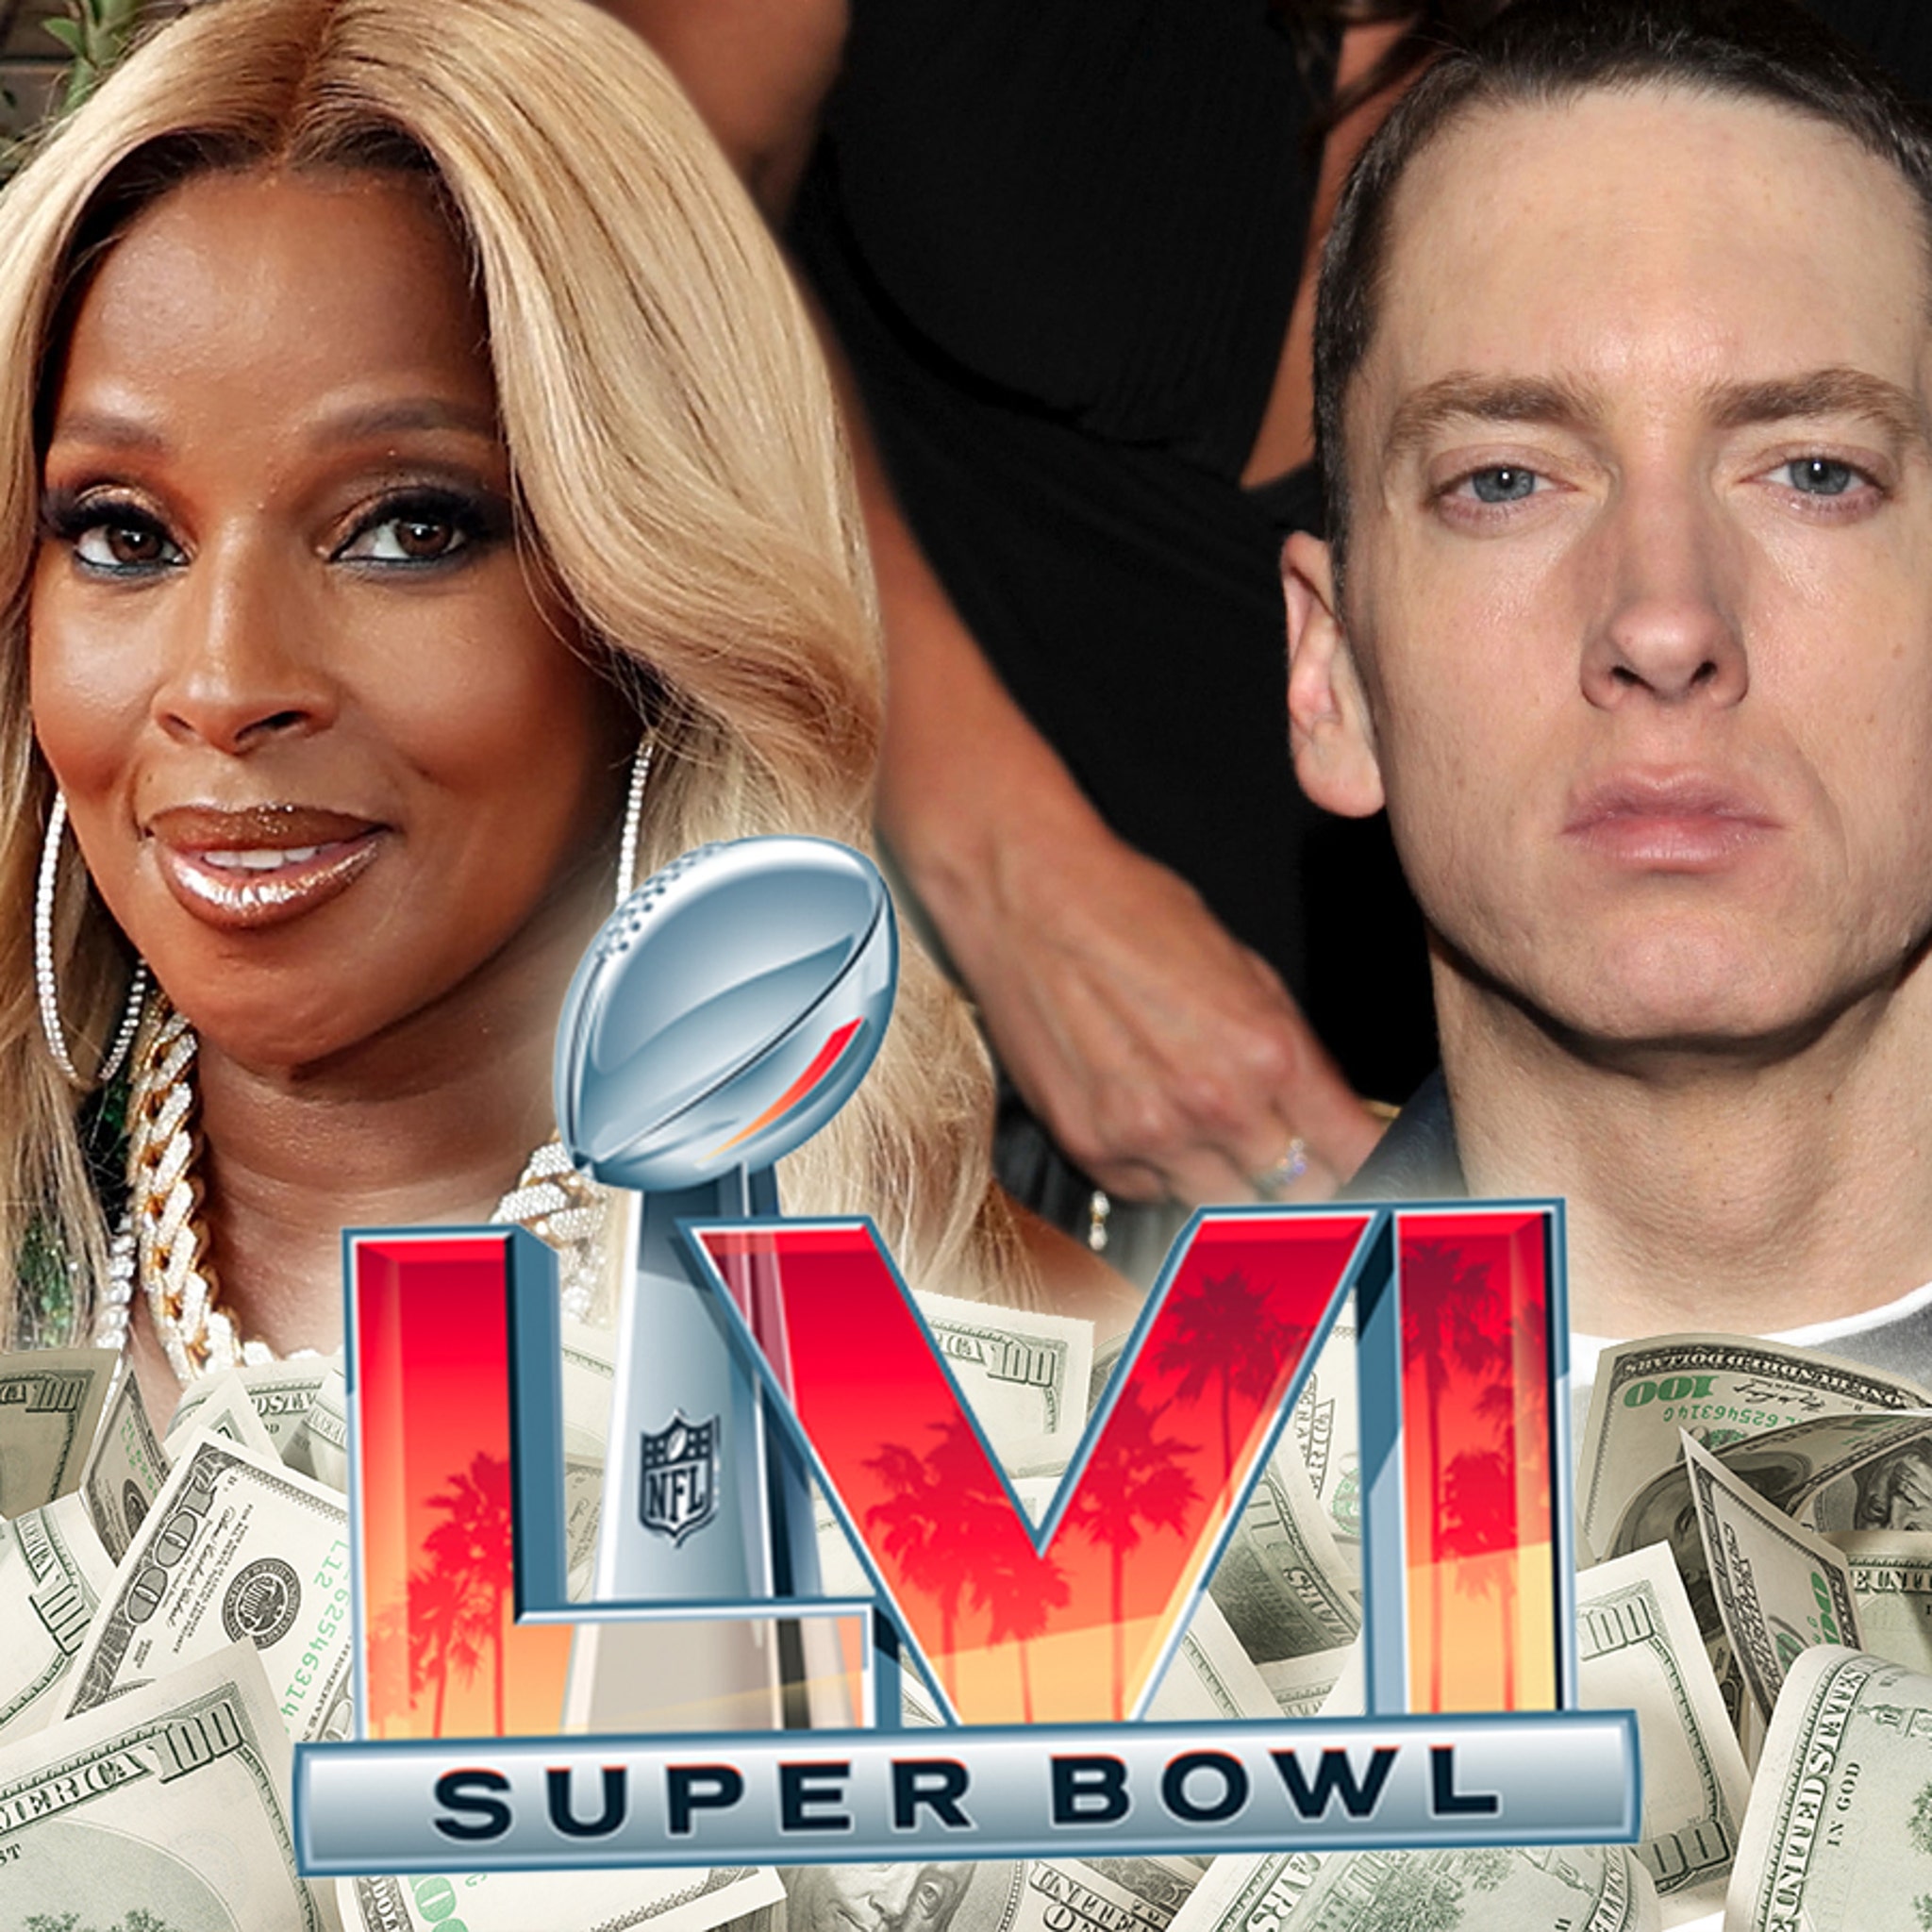 Super Bowl Prop Bets On Eminem's Hair Color, Mary J. Blige's Cleavage